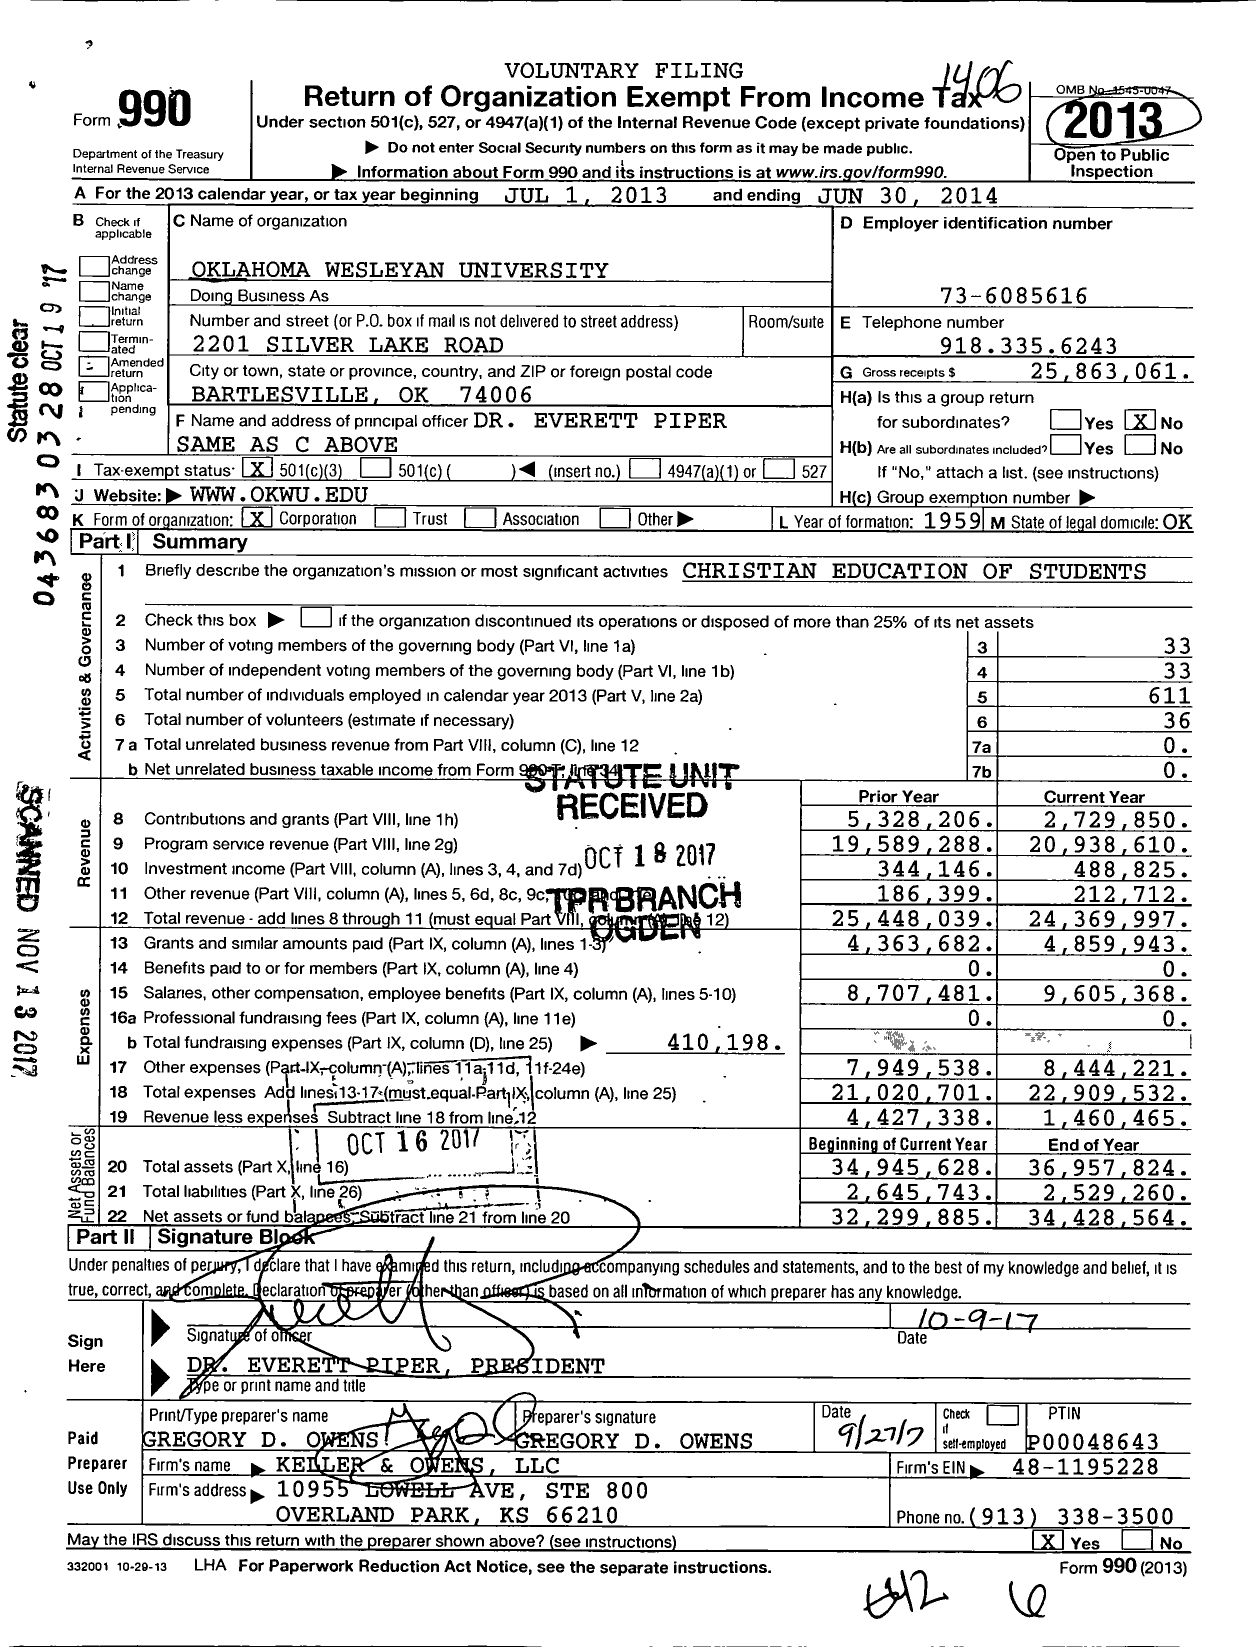 Image of first page of 2013 Form 990 for Oklahoma Wesleyan University (OKWU)